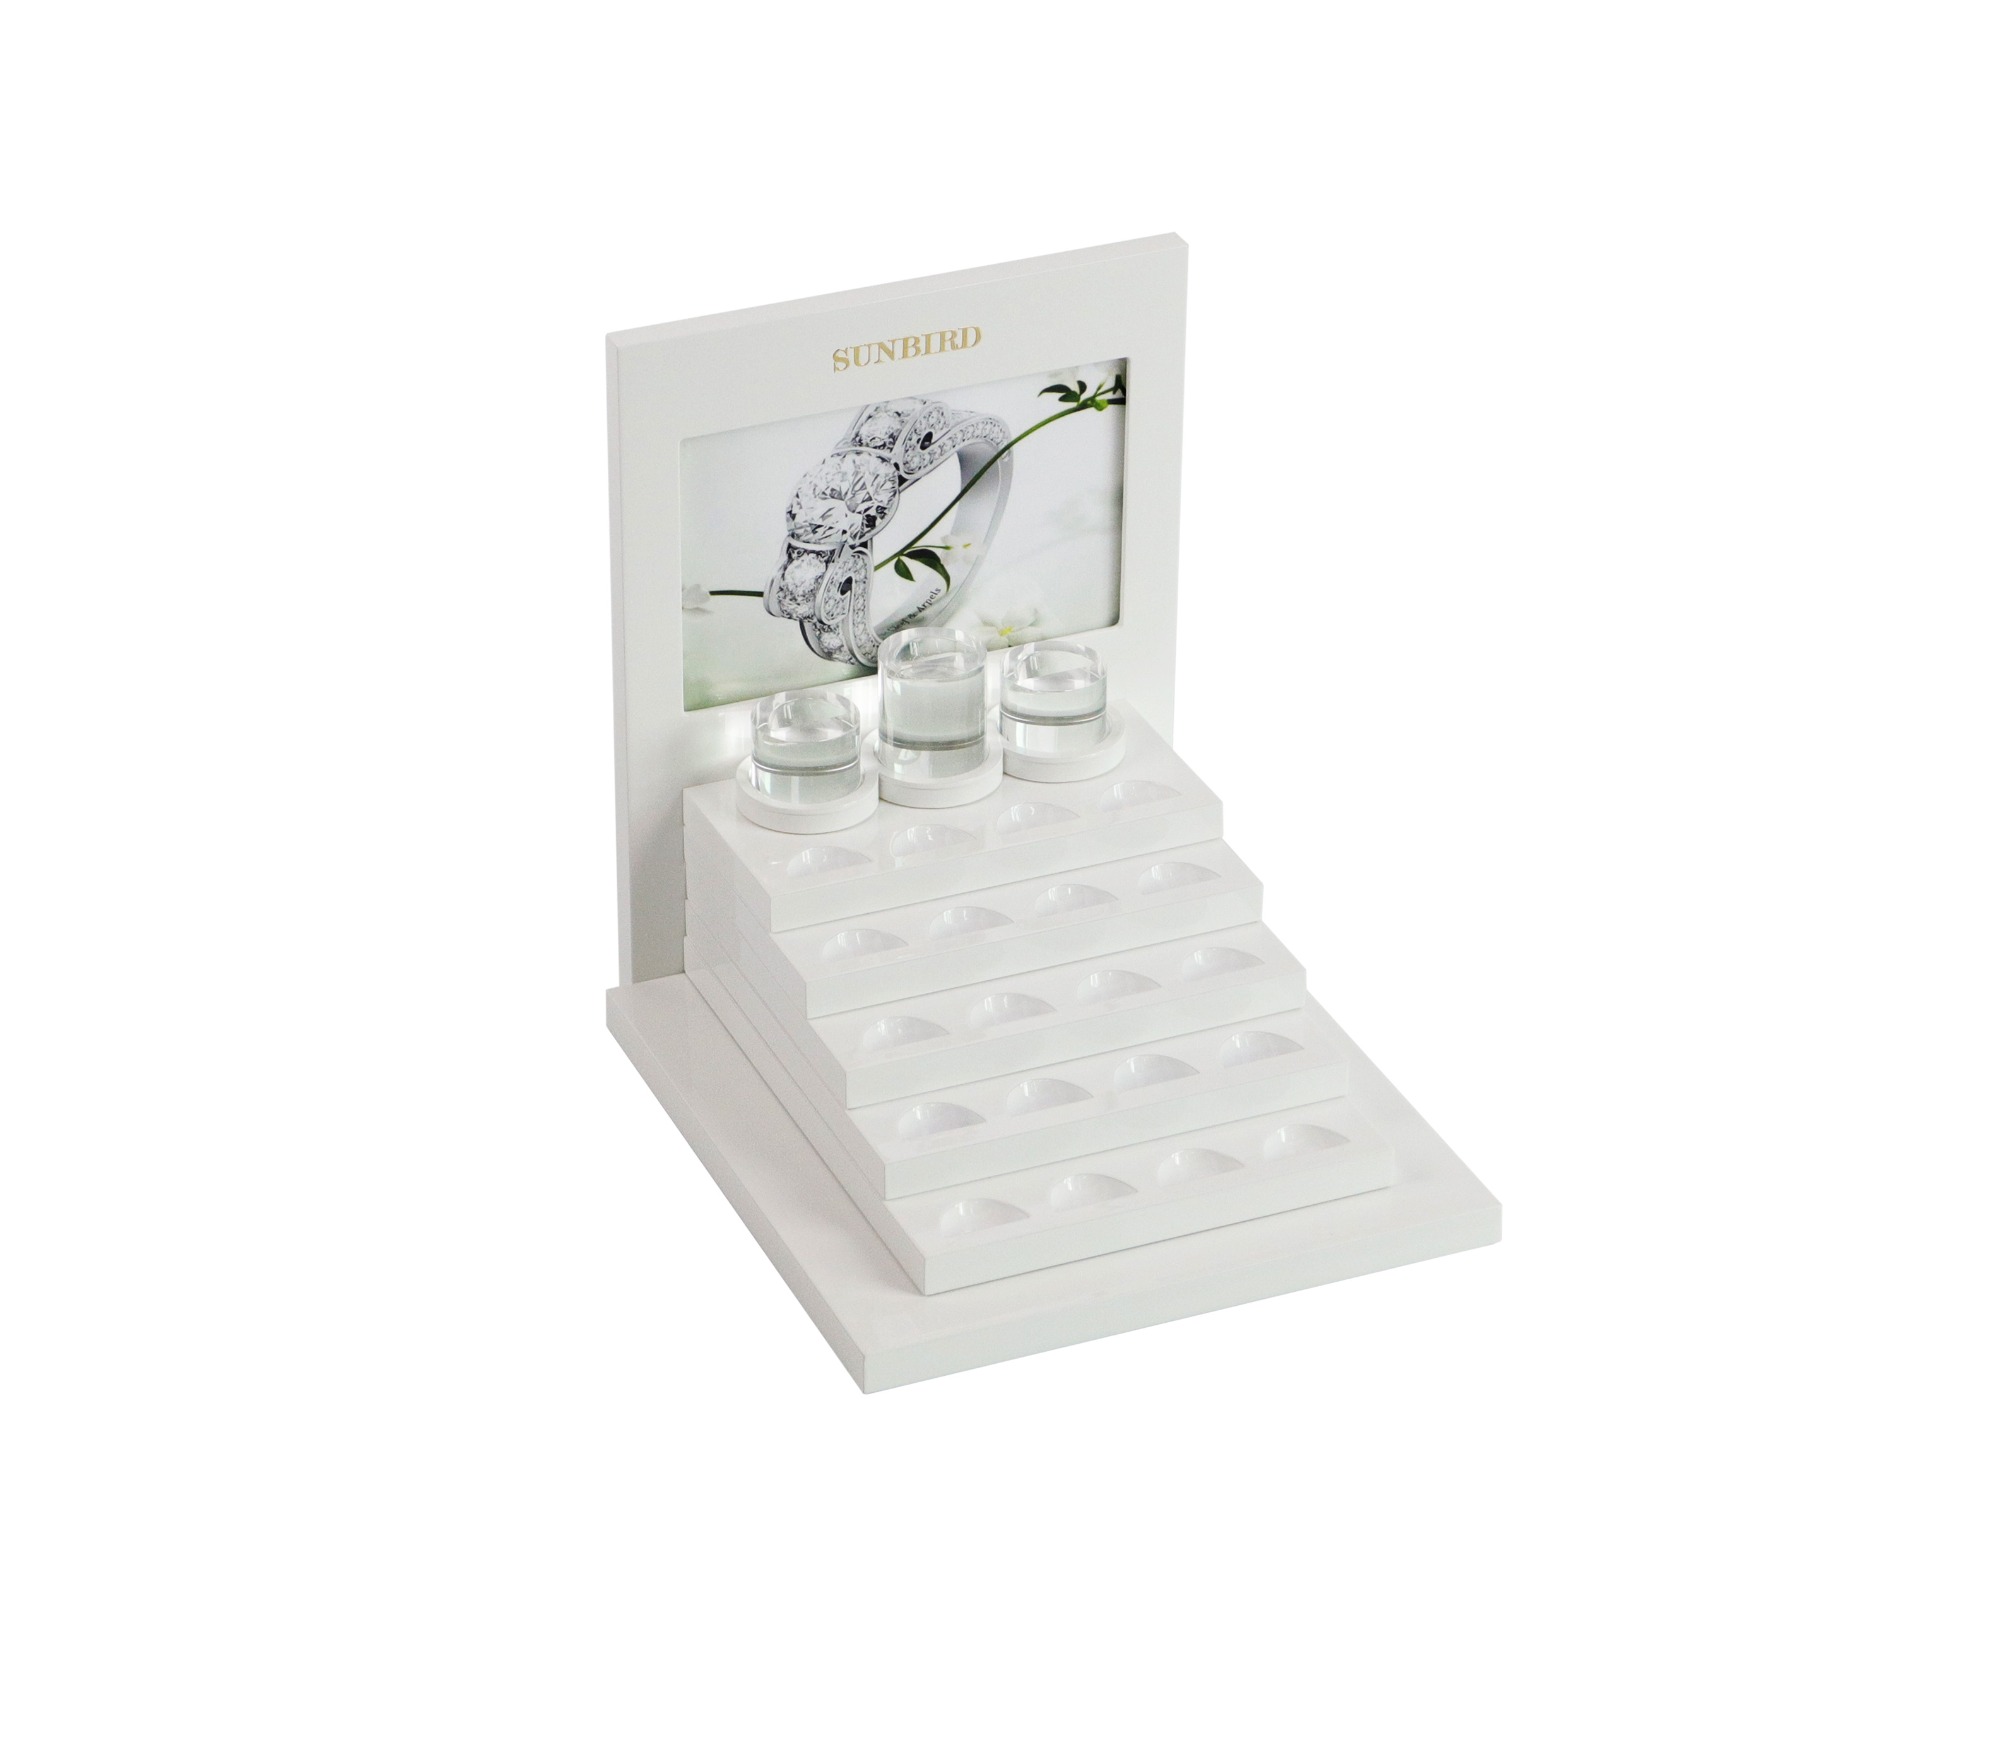 PC19008 Acrylic Ring Display Stand With Lacquered Finish For Window Showcase